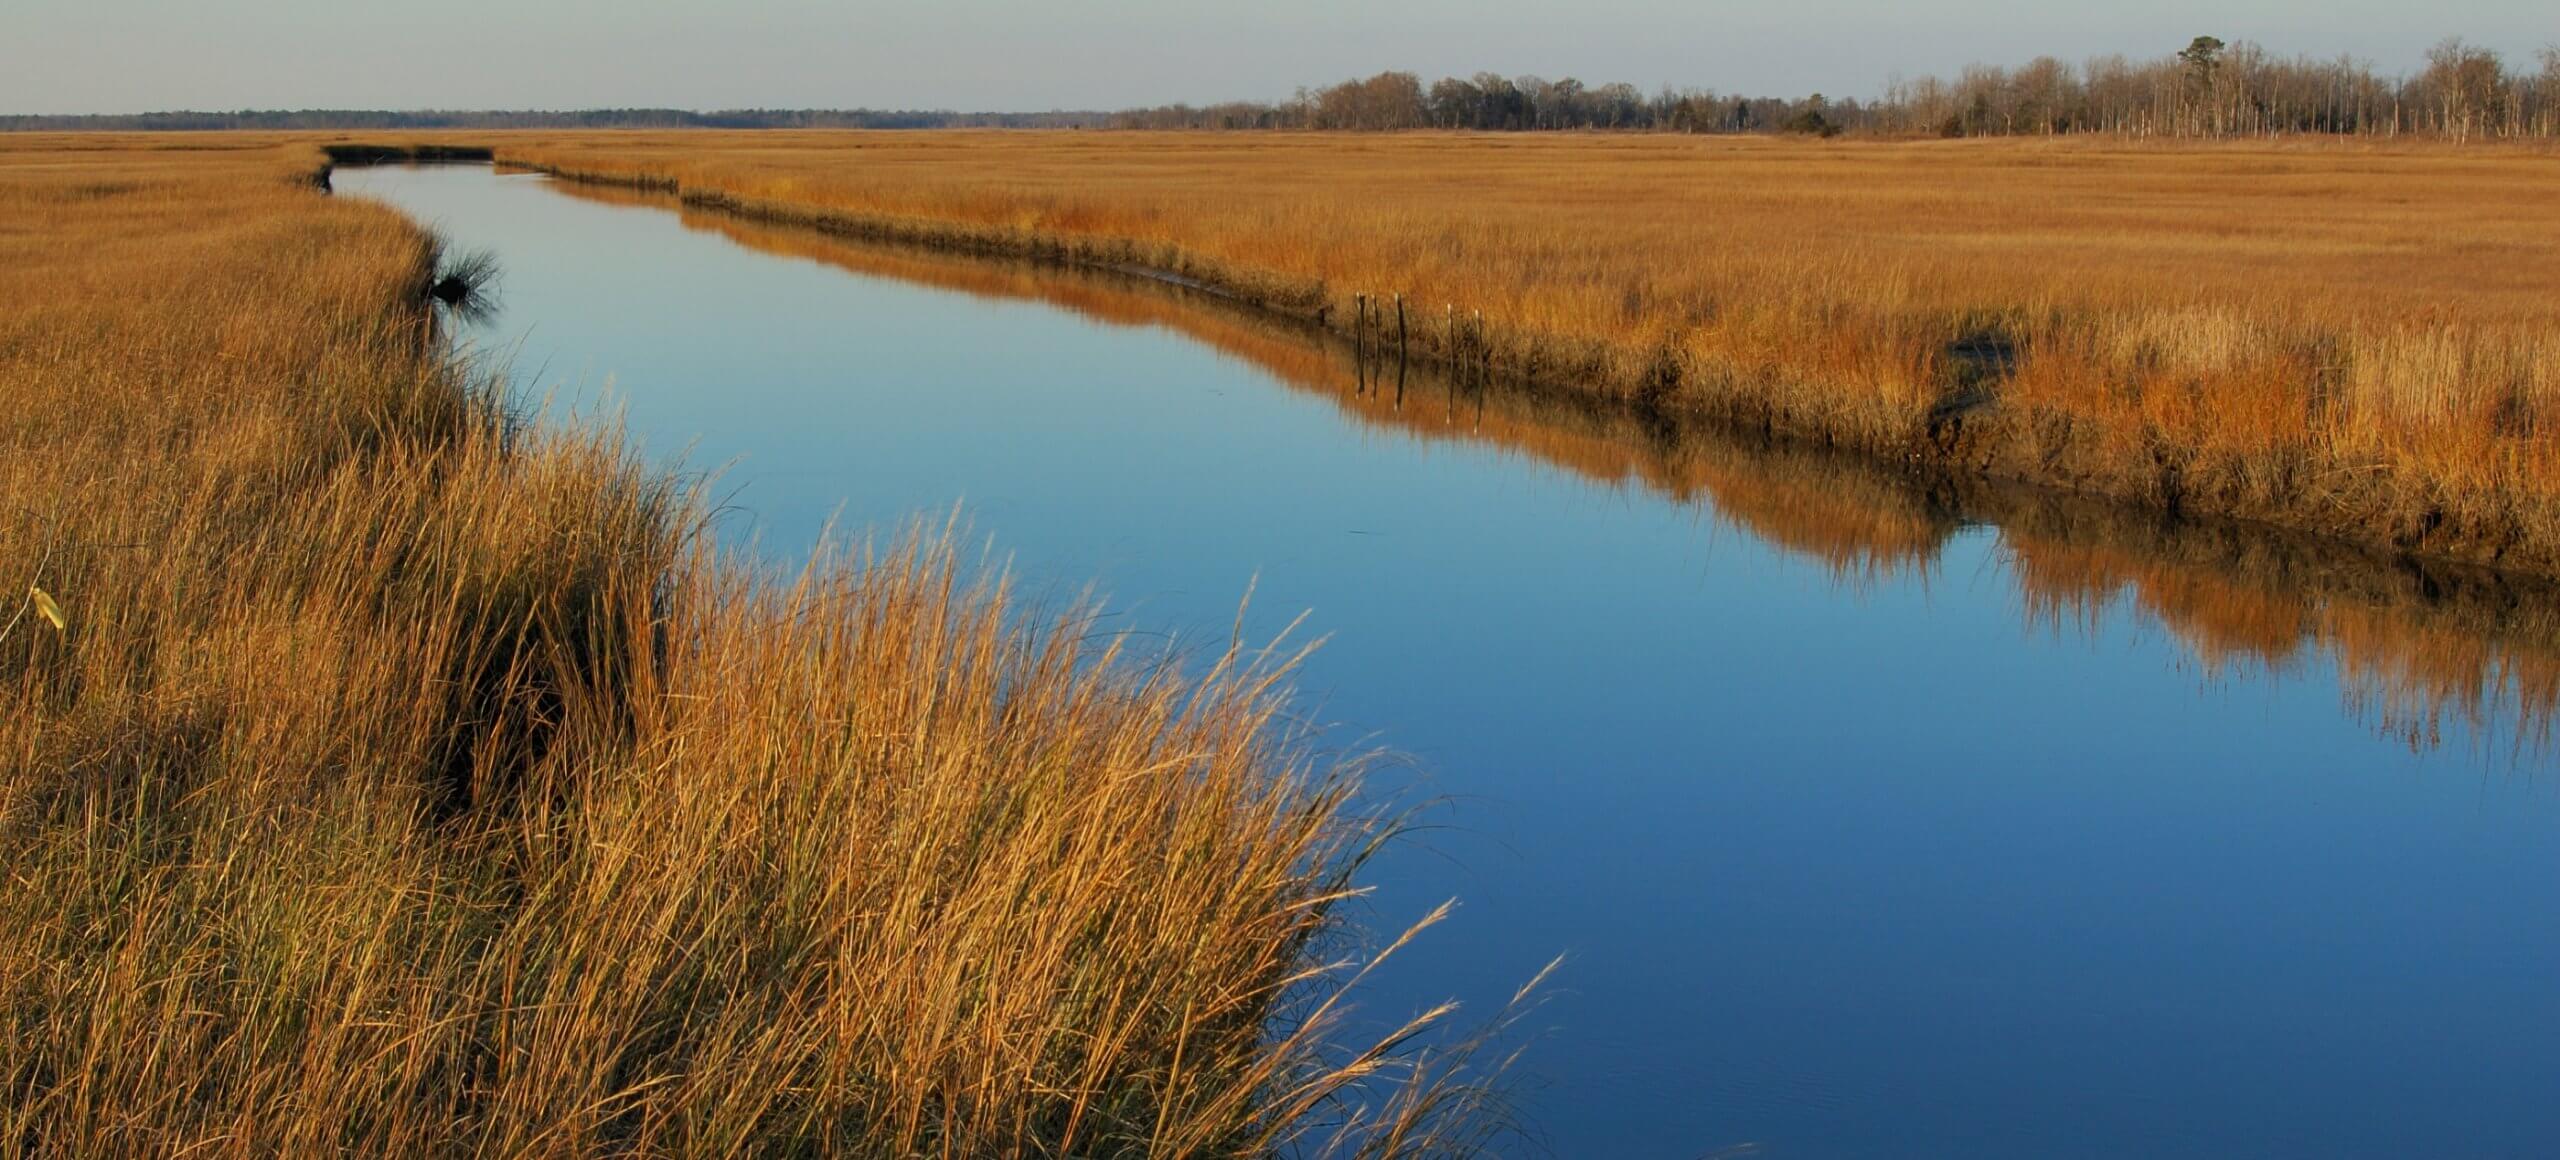 A waterway cuts between two meadows of tall brown grass under a light blue sky.